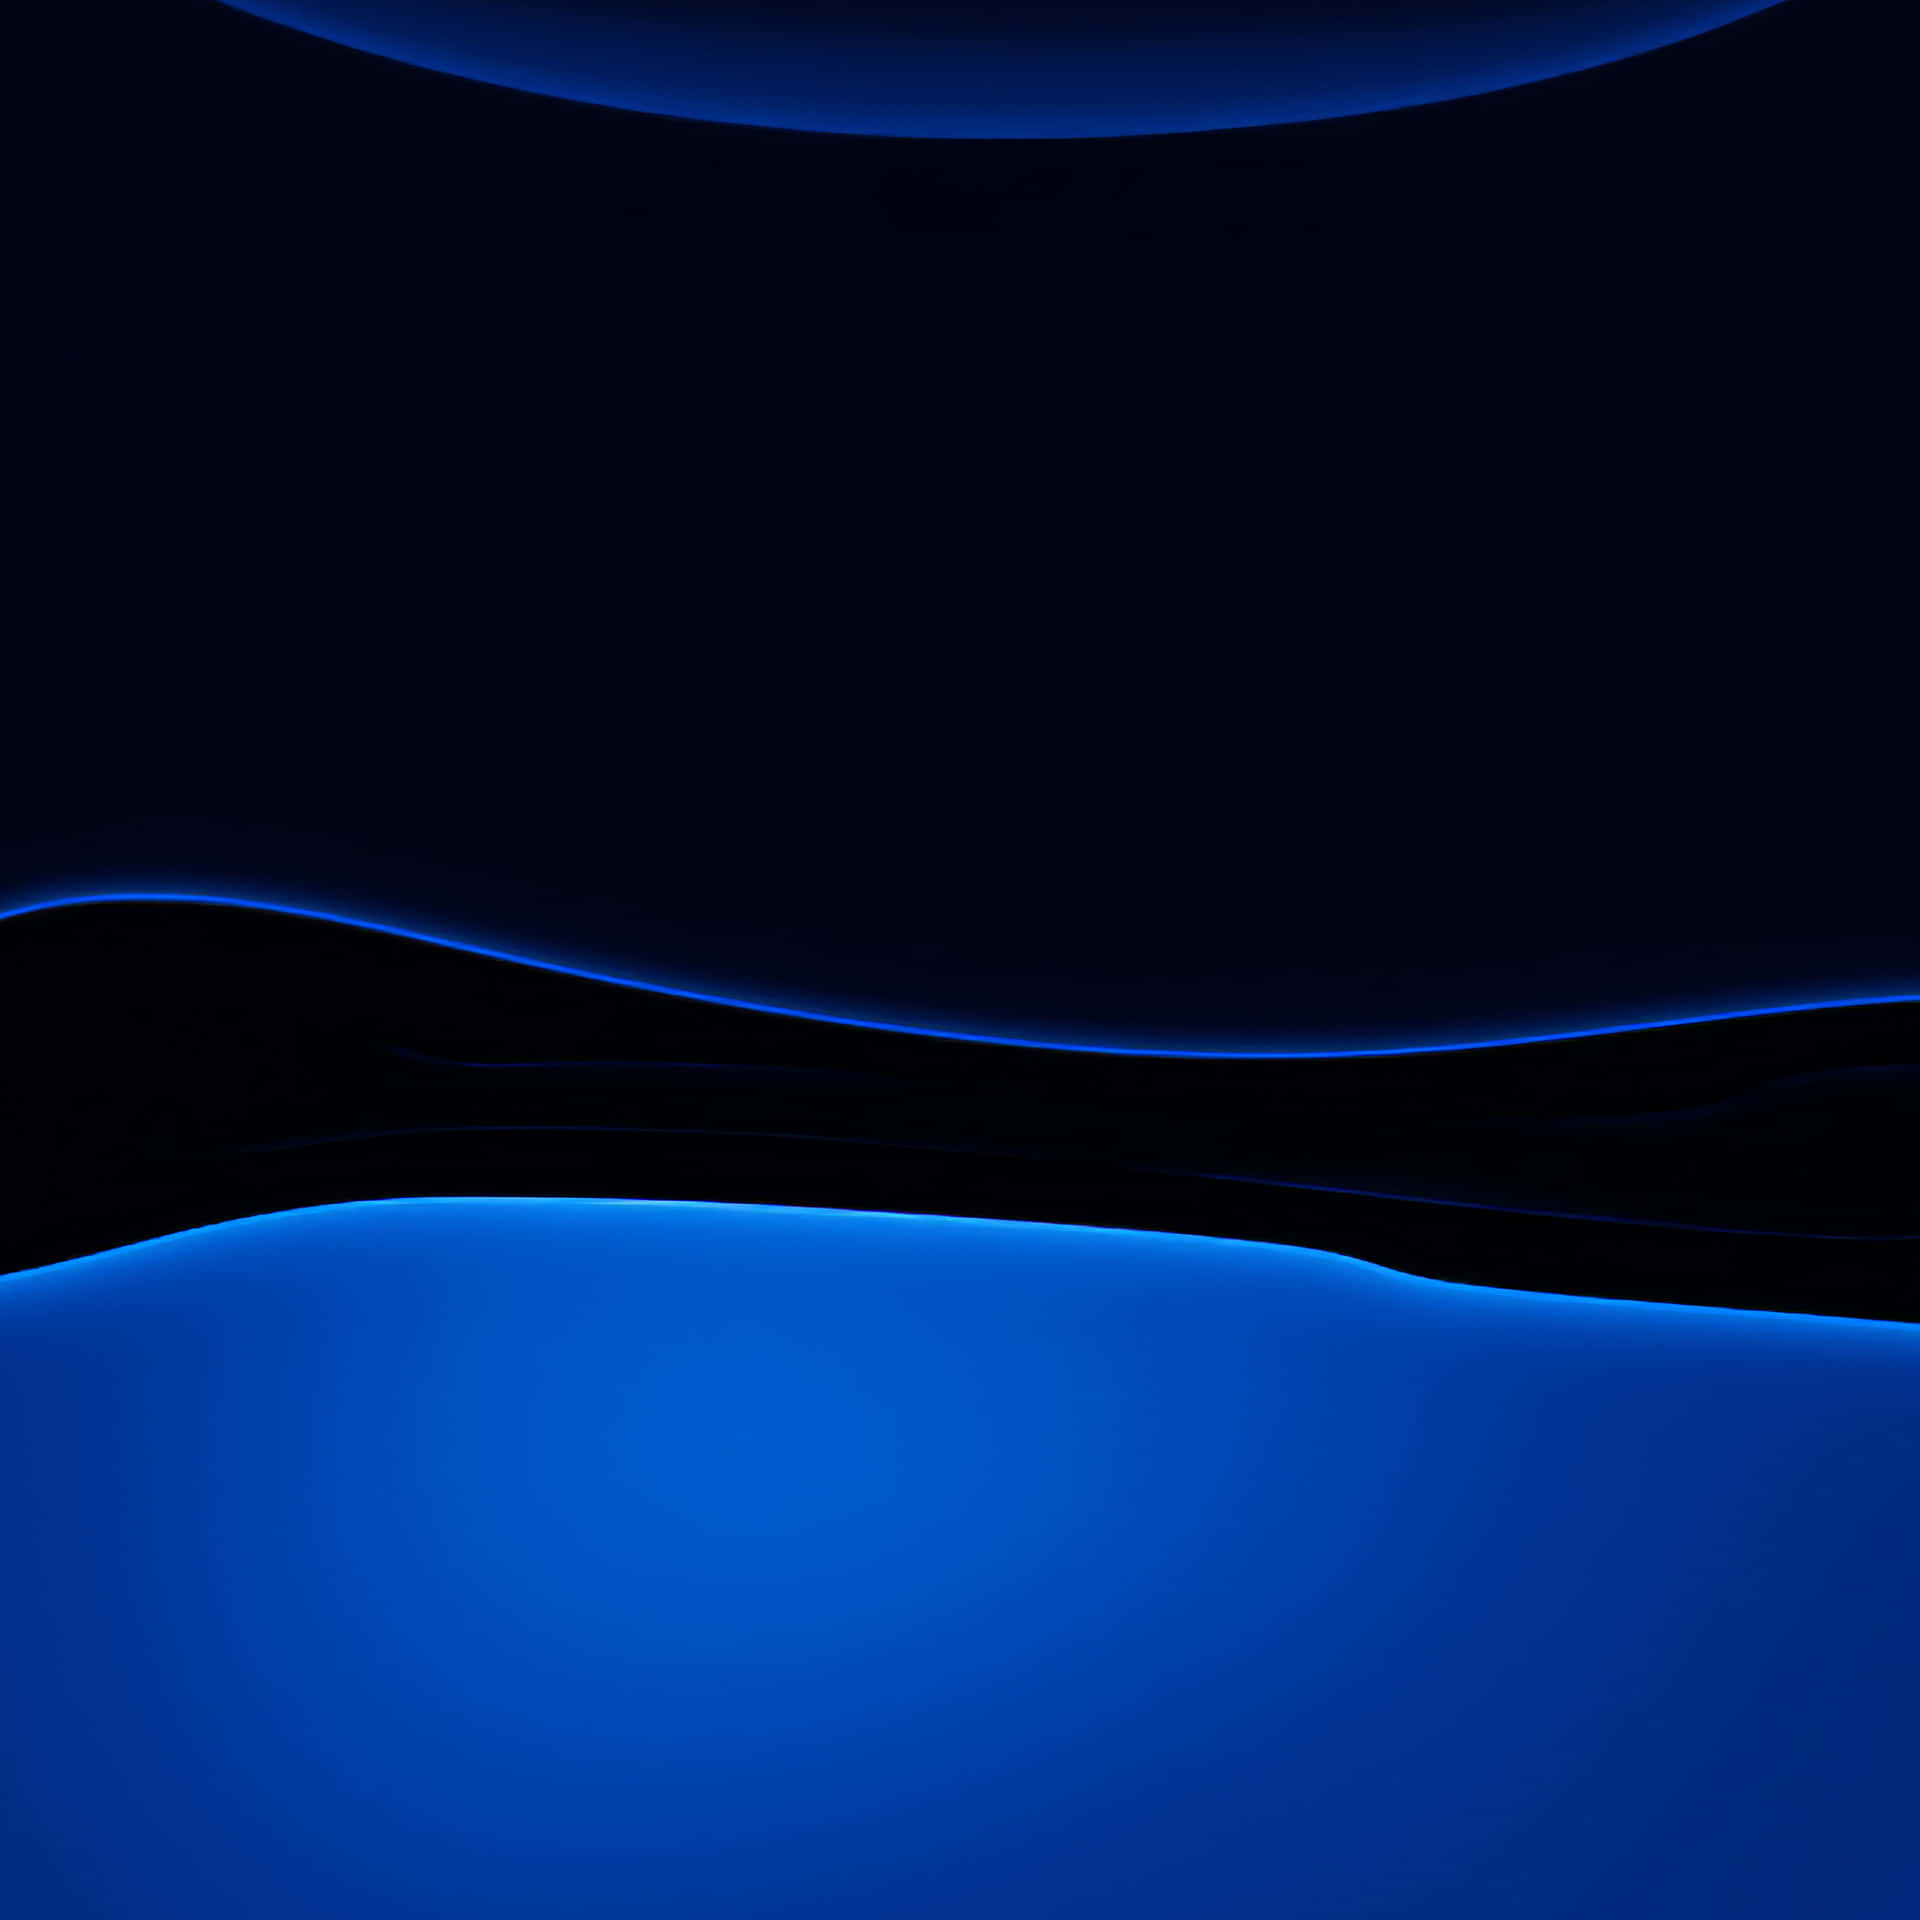 Exploring the Possibilities with an Electronic Blue Ipad Wallpaper